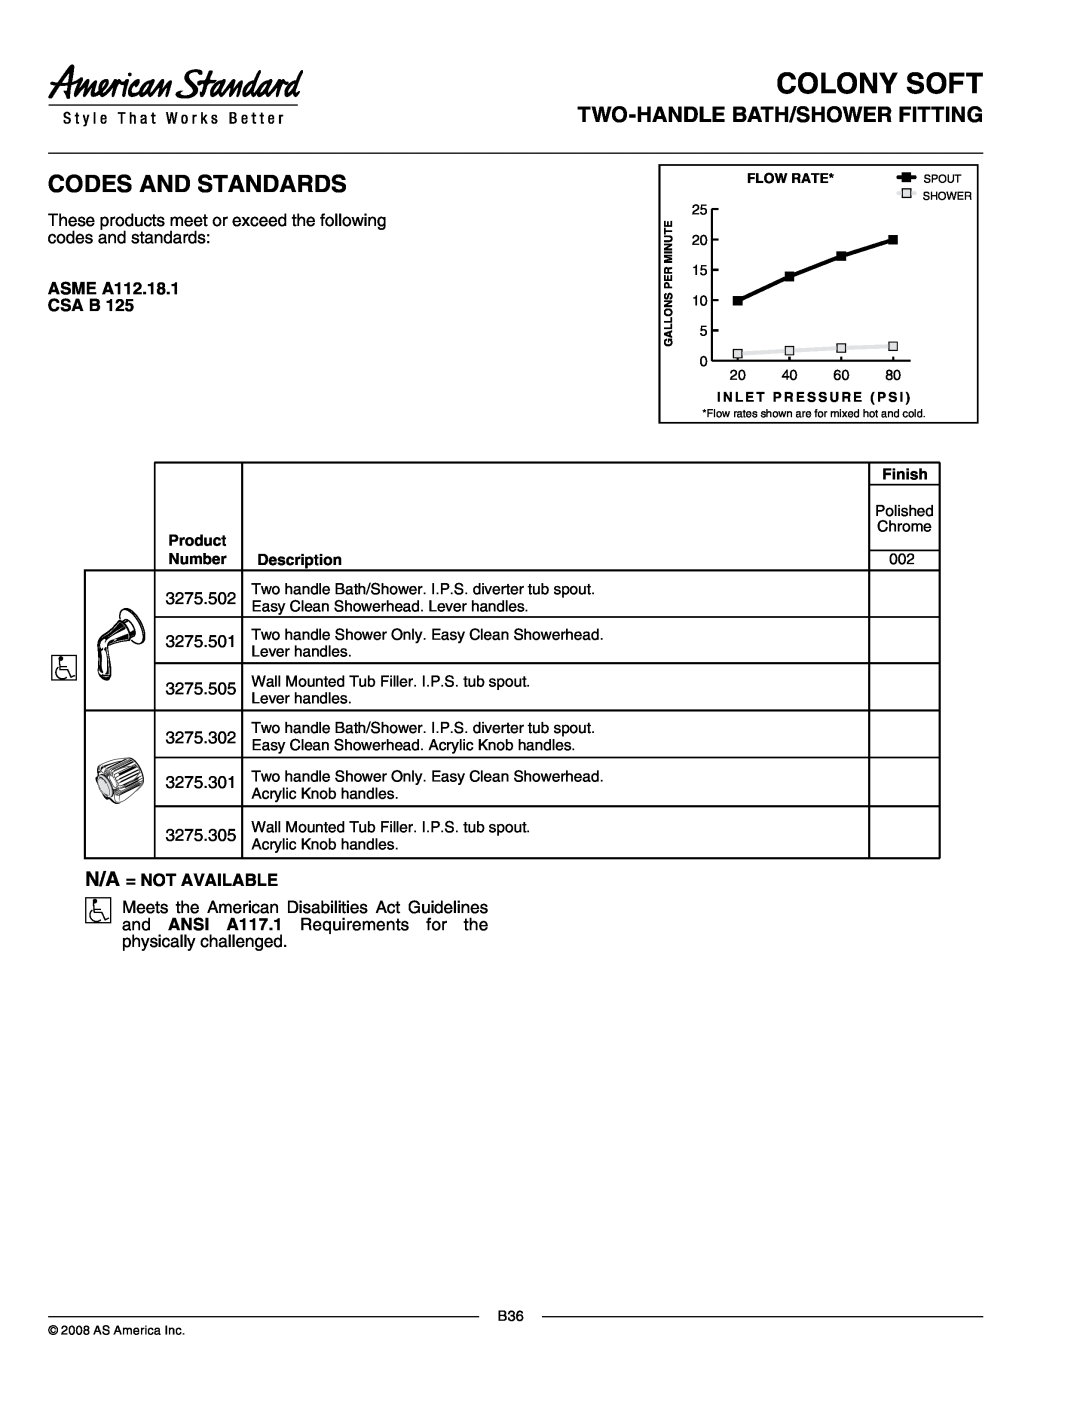 American Standard 3275.301 ASME A112.18.1 CSA B, N/A = Not Available, Product, Number, Description, Finish, Colony Soft 